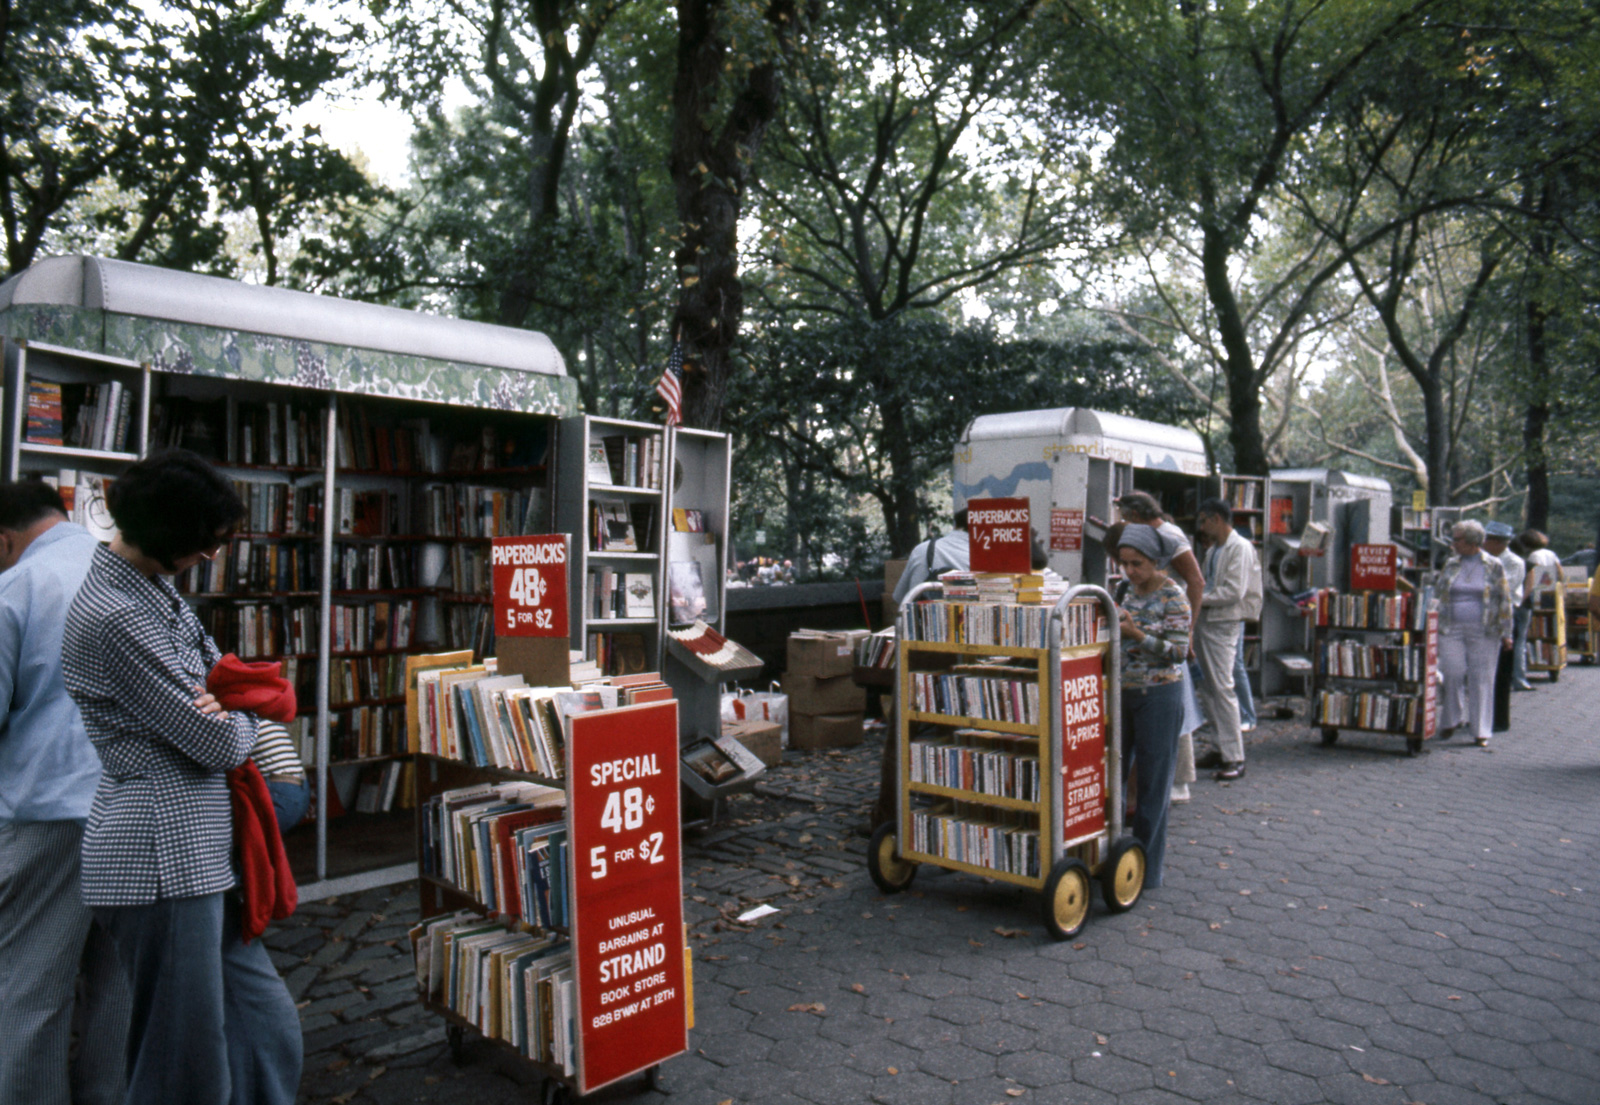 Mobile book carts in Central Park from the Strand Bookstore, New York City, 1976